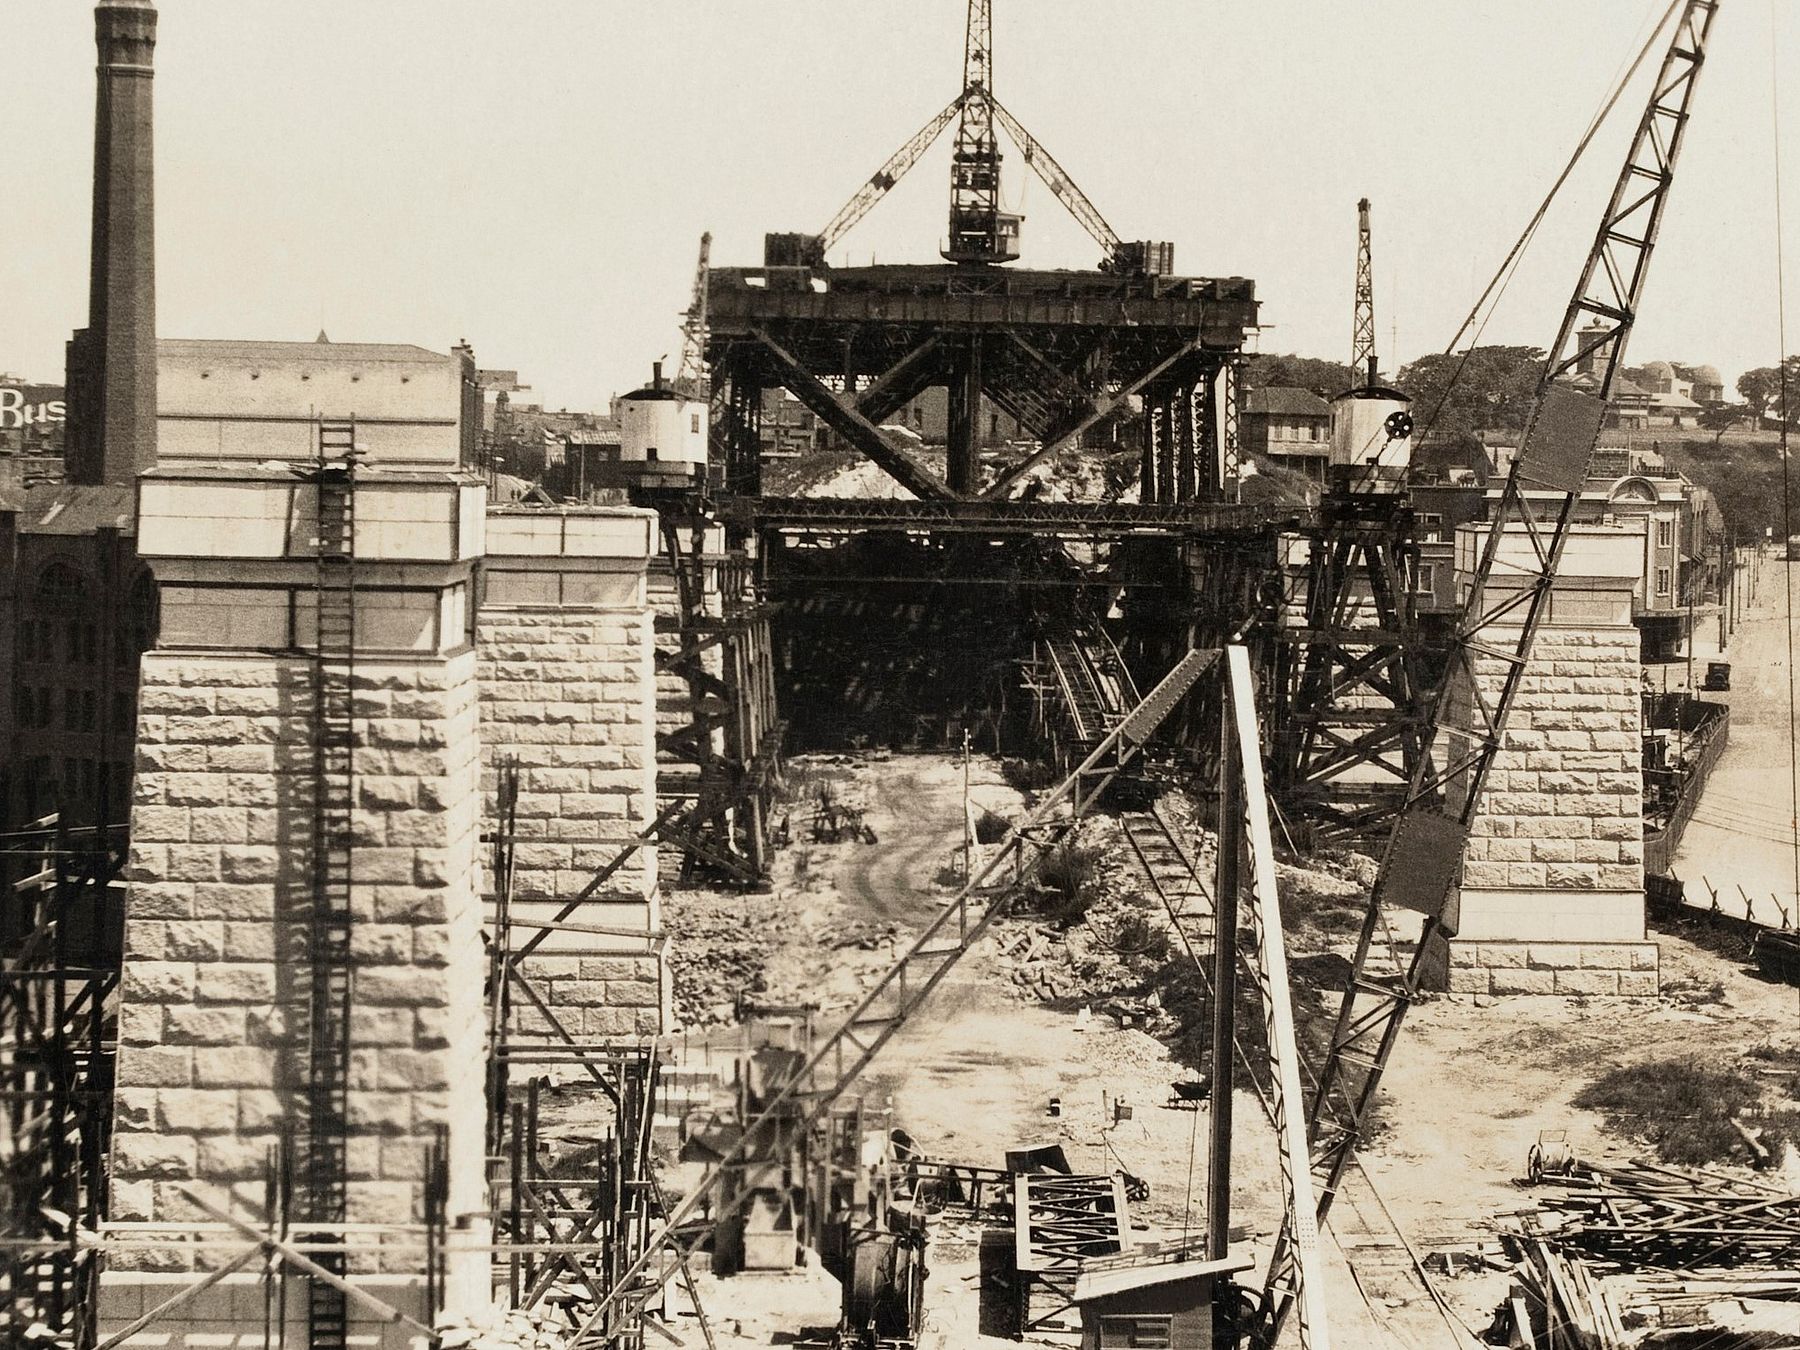 [Bridge construction showing granite on pylons] showing Quarry at Moruya used for construction of the Sydney Harbour Bridge, albums, photographs and clippings by Stanley, S.B. Purves, 1925-1927, PXD 747
